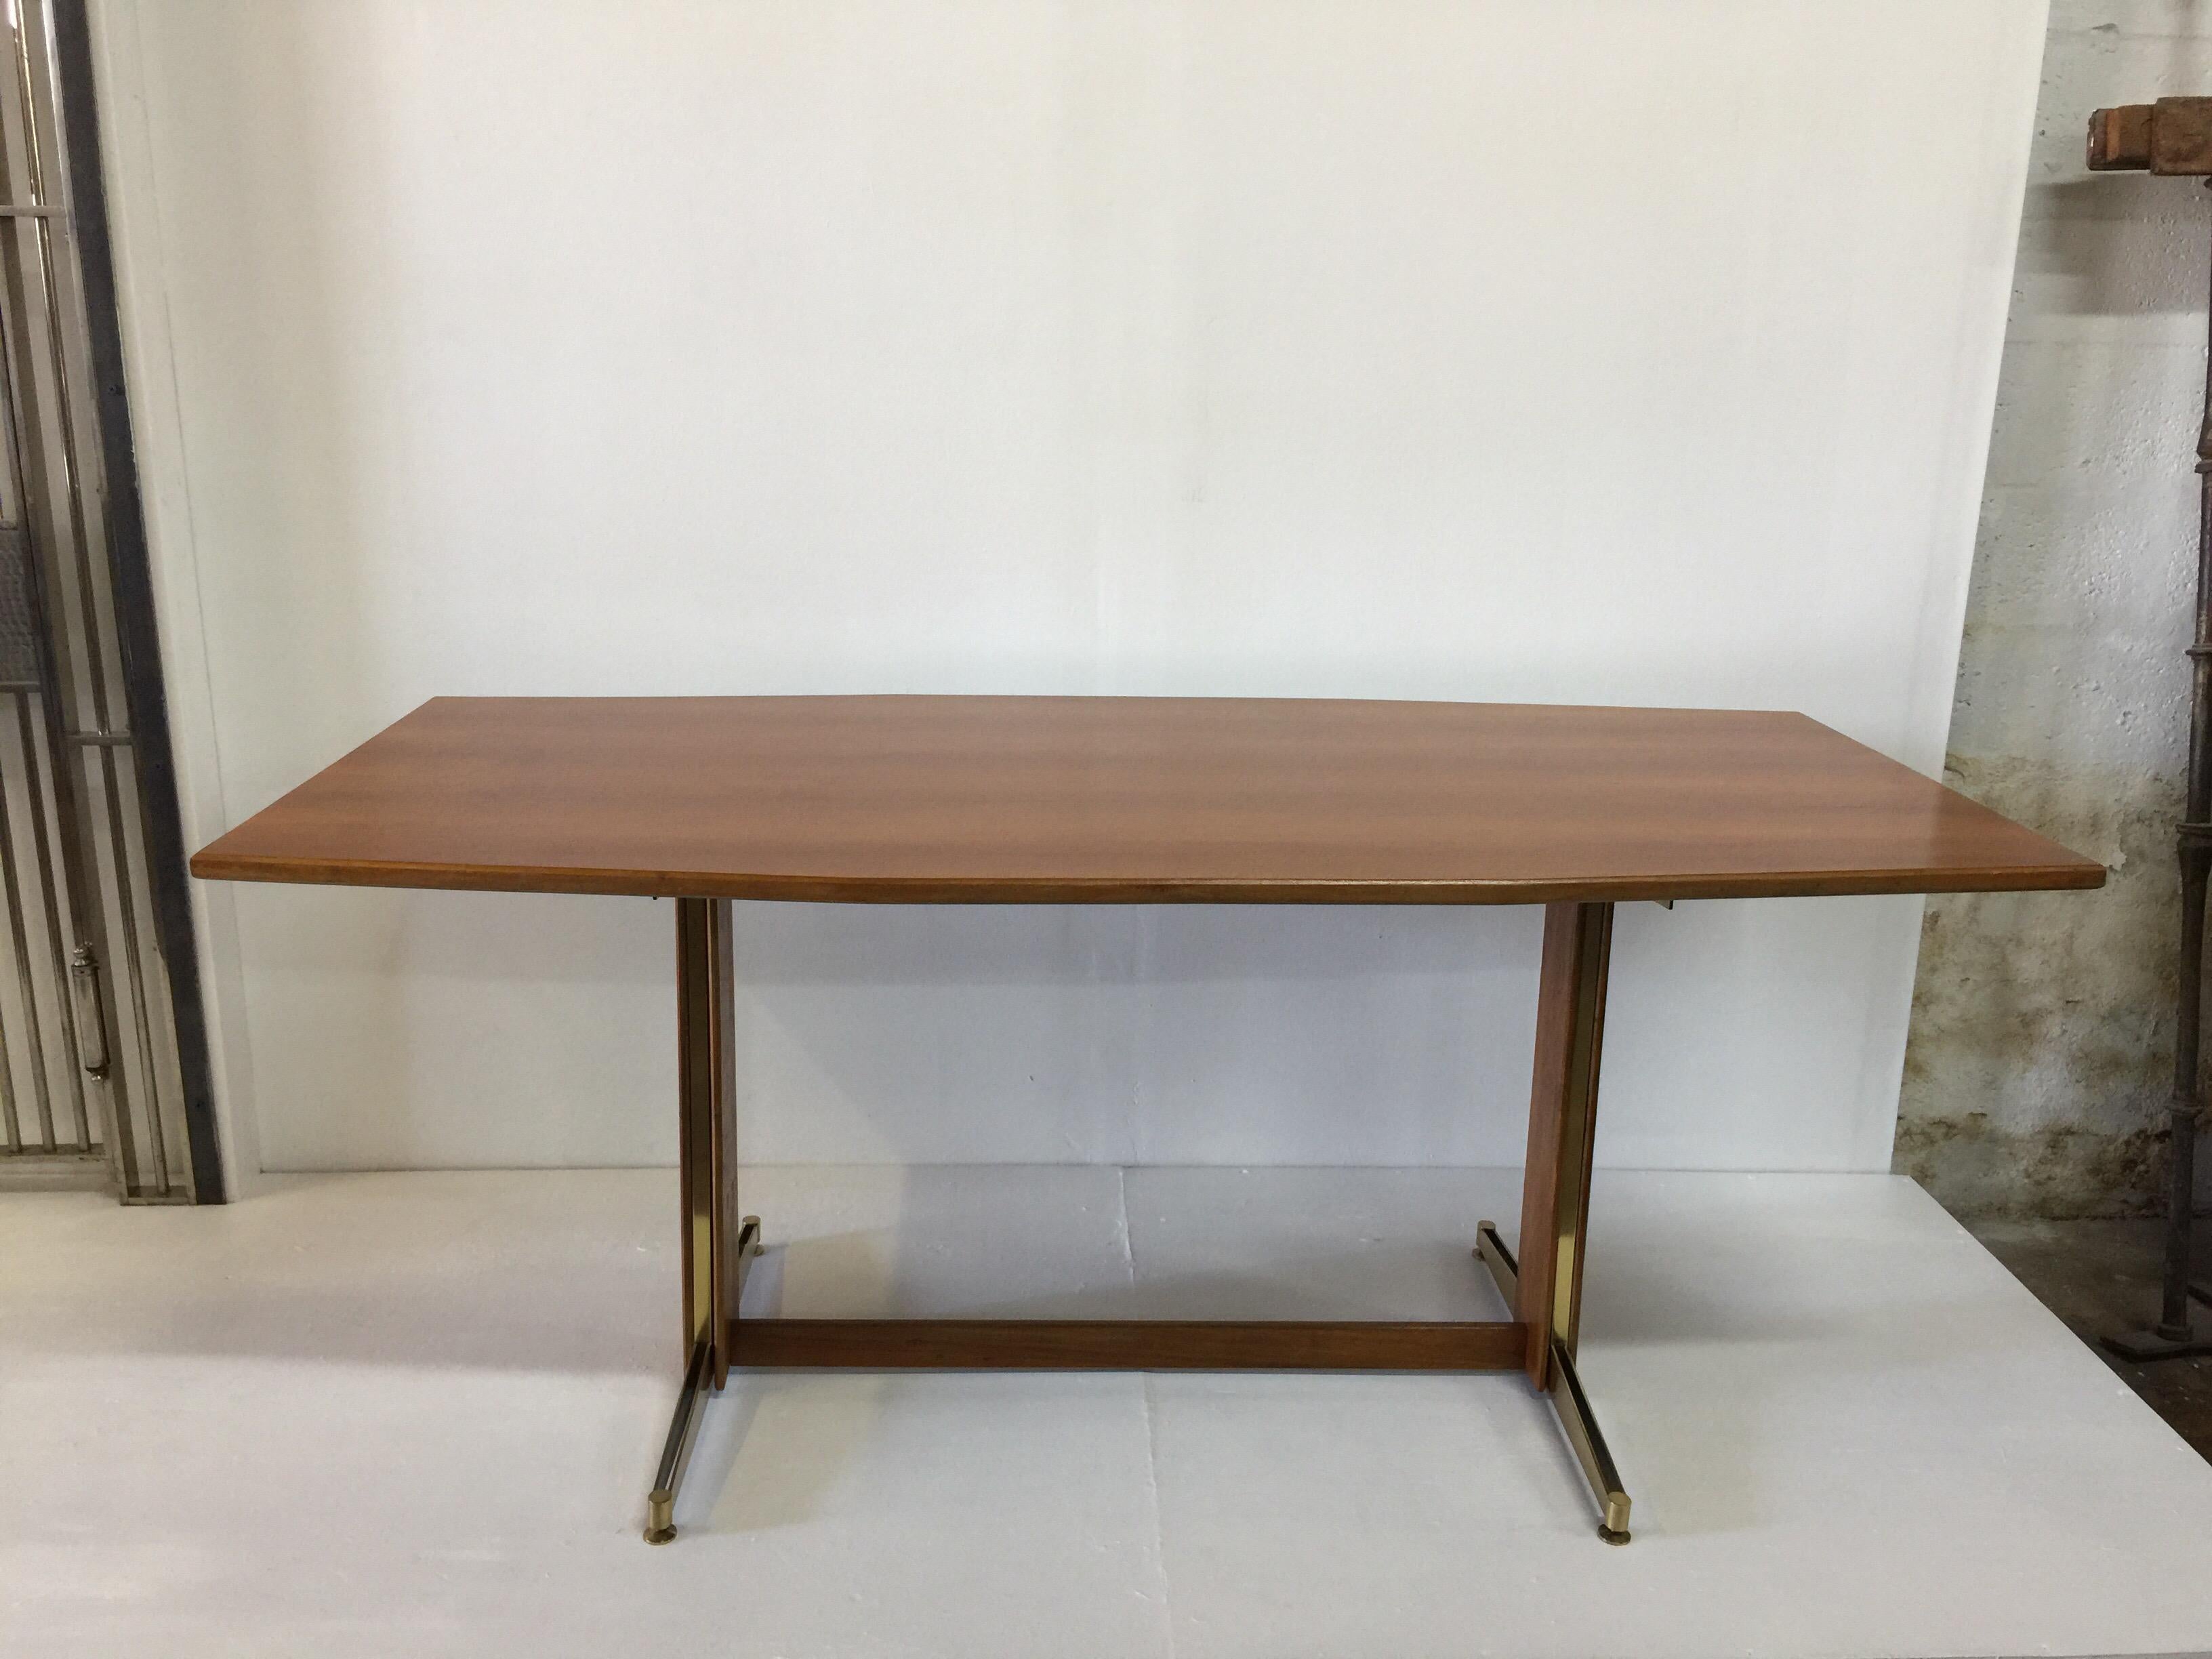 Such a lovely table with Italian fruitwood veneer top and brass accents to base. The top is slightly tapering at the ends which adds style! This is a very solid piece and in very nice condition - see detailed images.